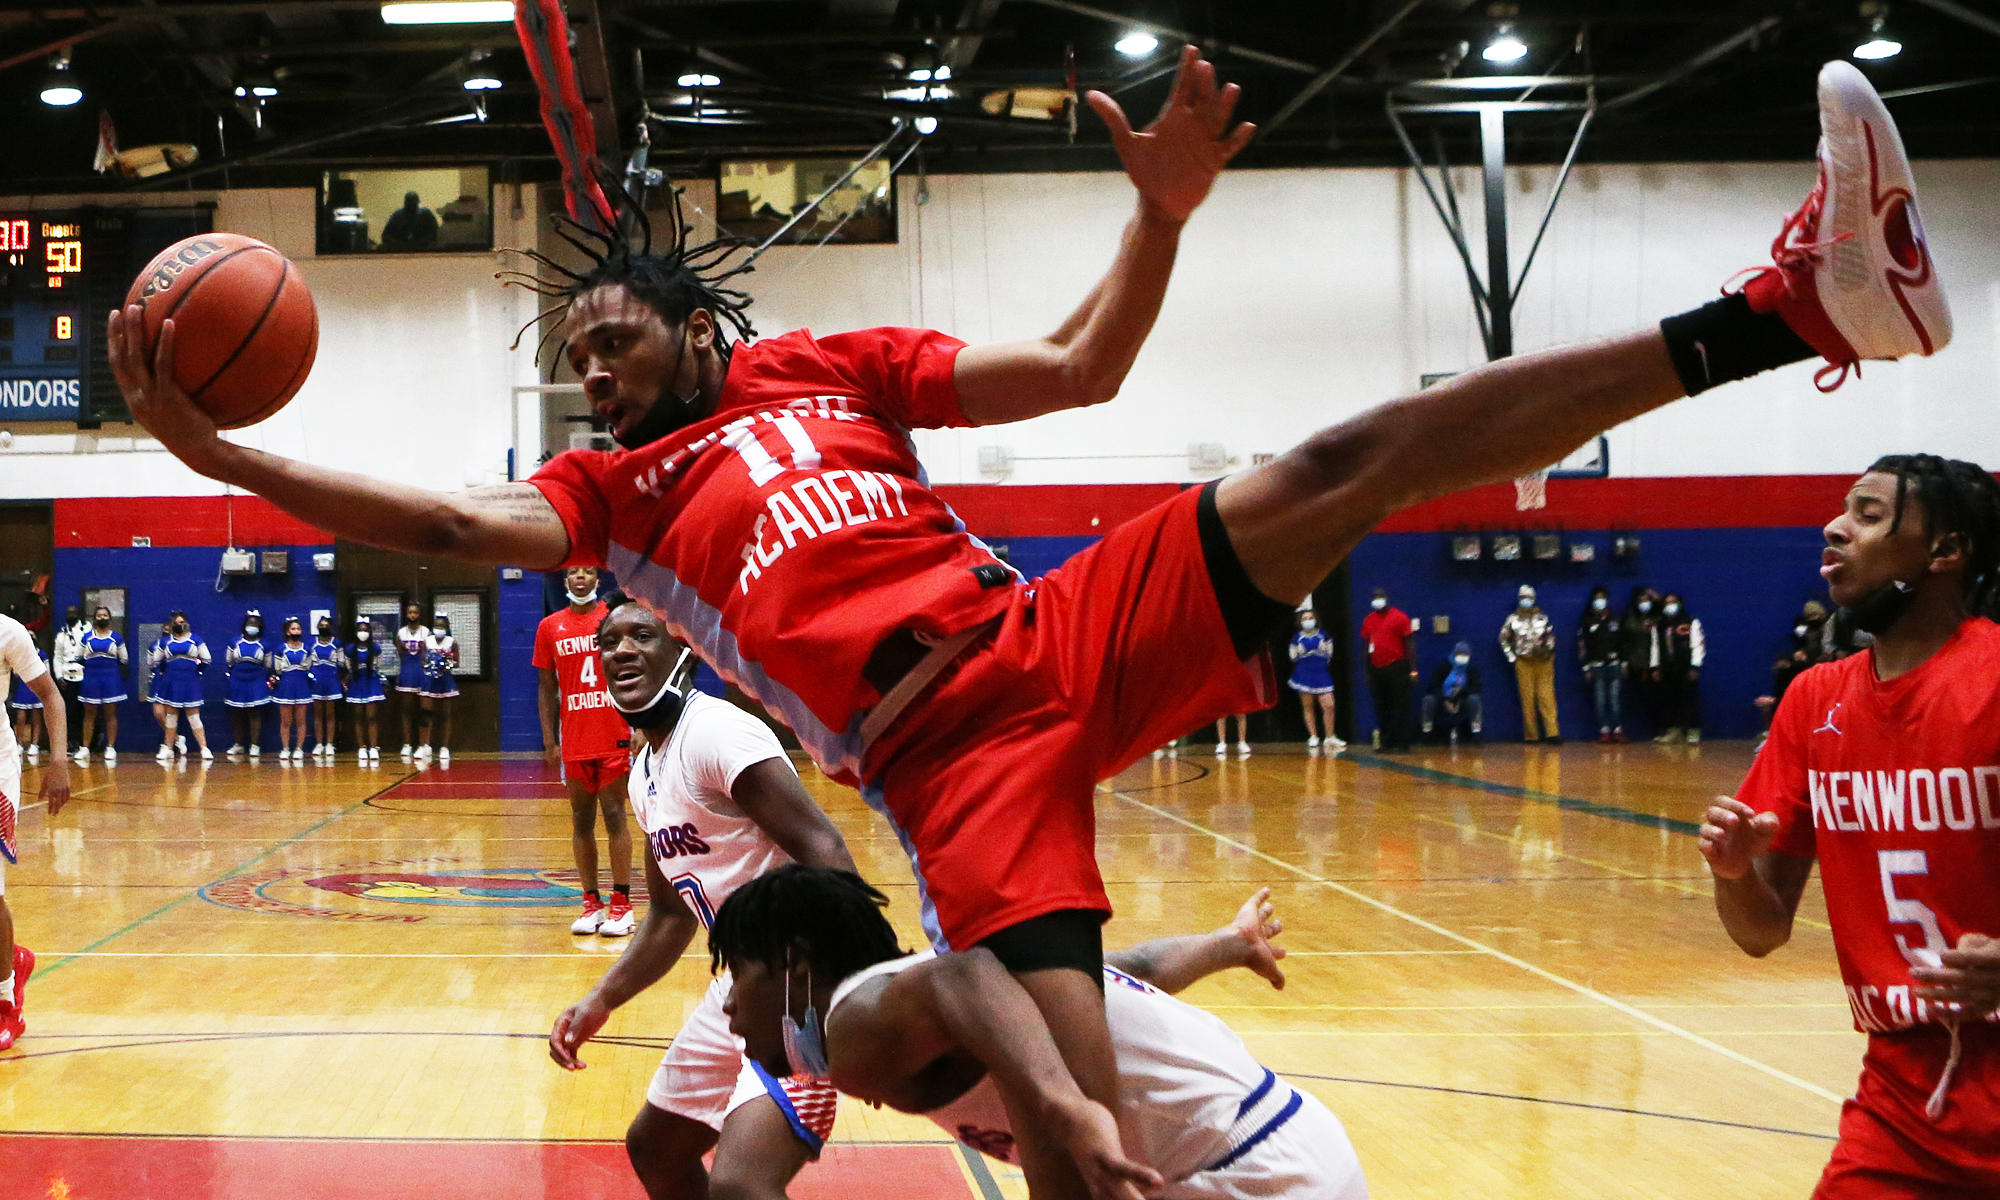 Kenwood’s Rashard Anderson (11) grabs a rebound and comes down hard as the Broncos play Curie.